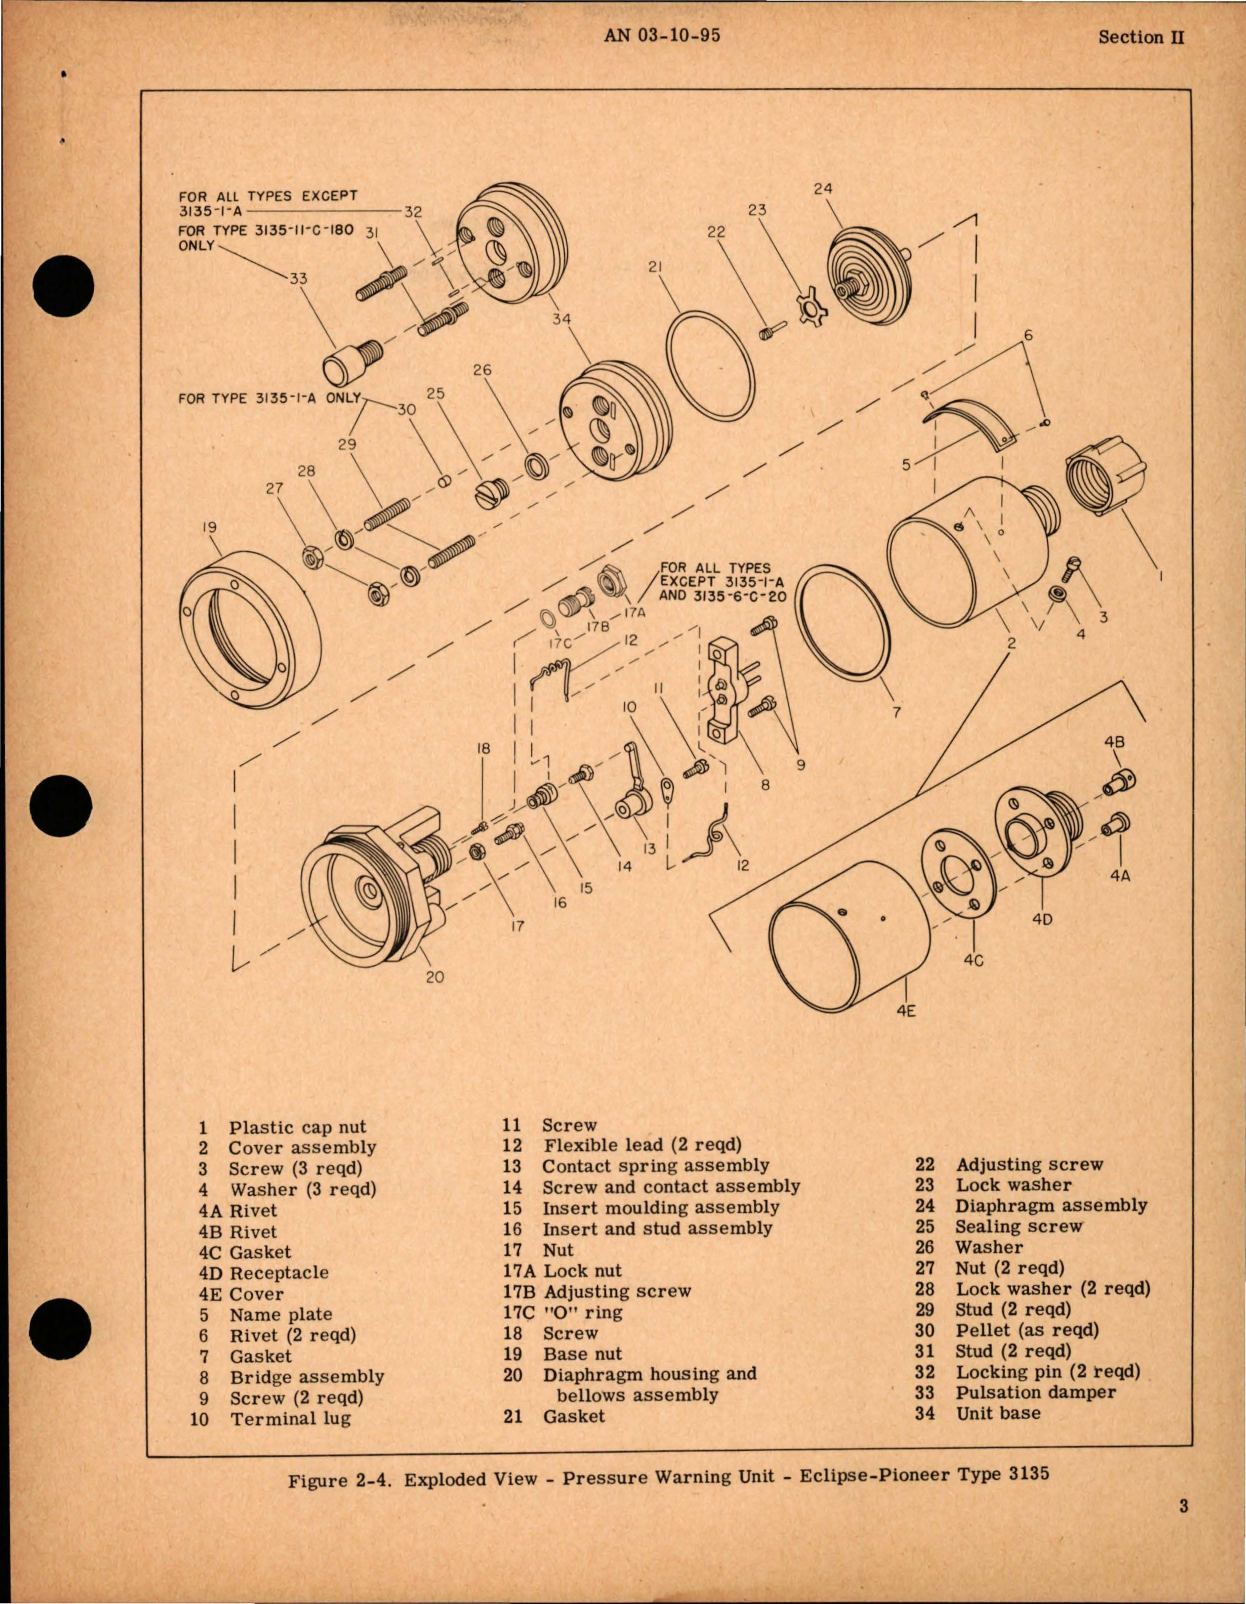 Sample page 5 from AirCorps Library document: Overhaul Instructions for Pressure Warning Units - 3135 Series